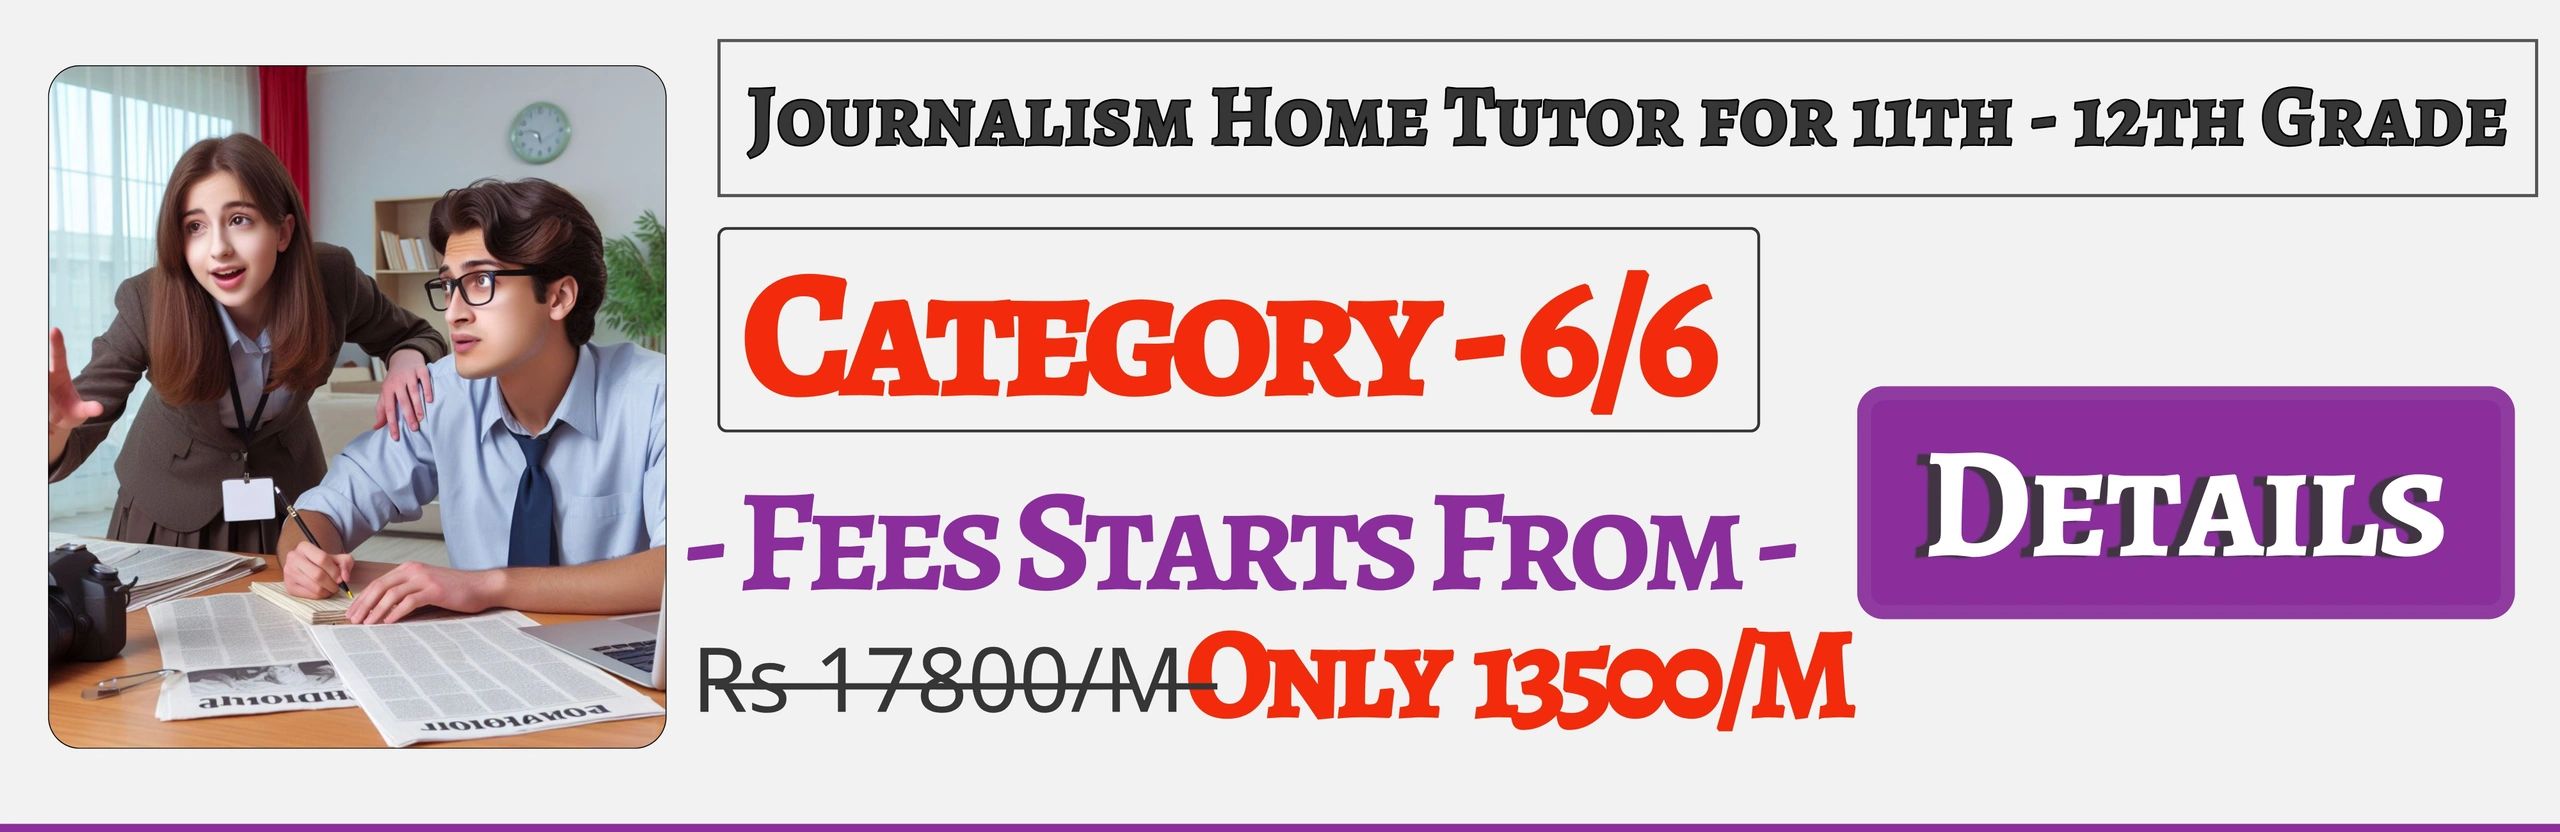 Book Best Nearby Journalism Home Tuition Tutors For 11th & 12th In Jaipur , Fees Only 13500/M